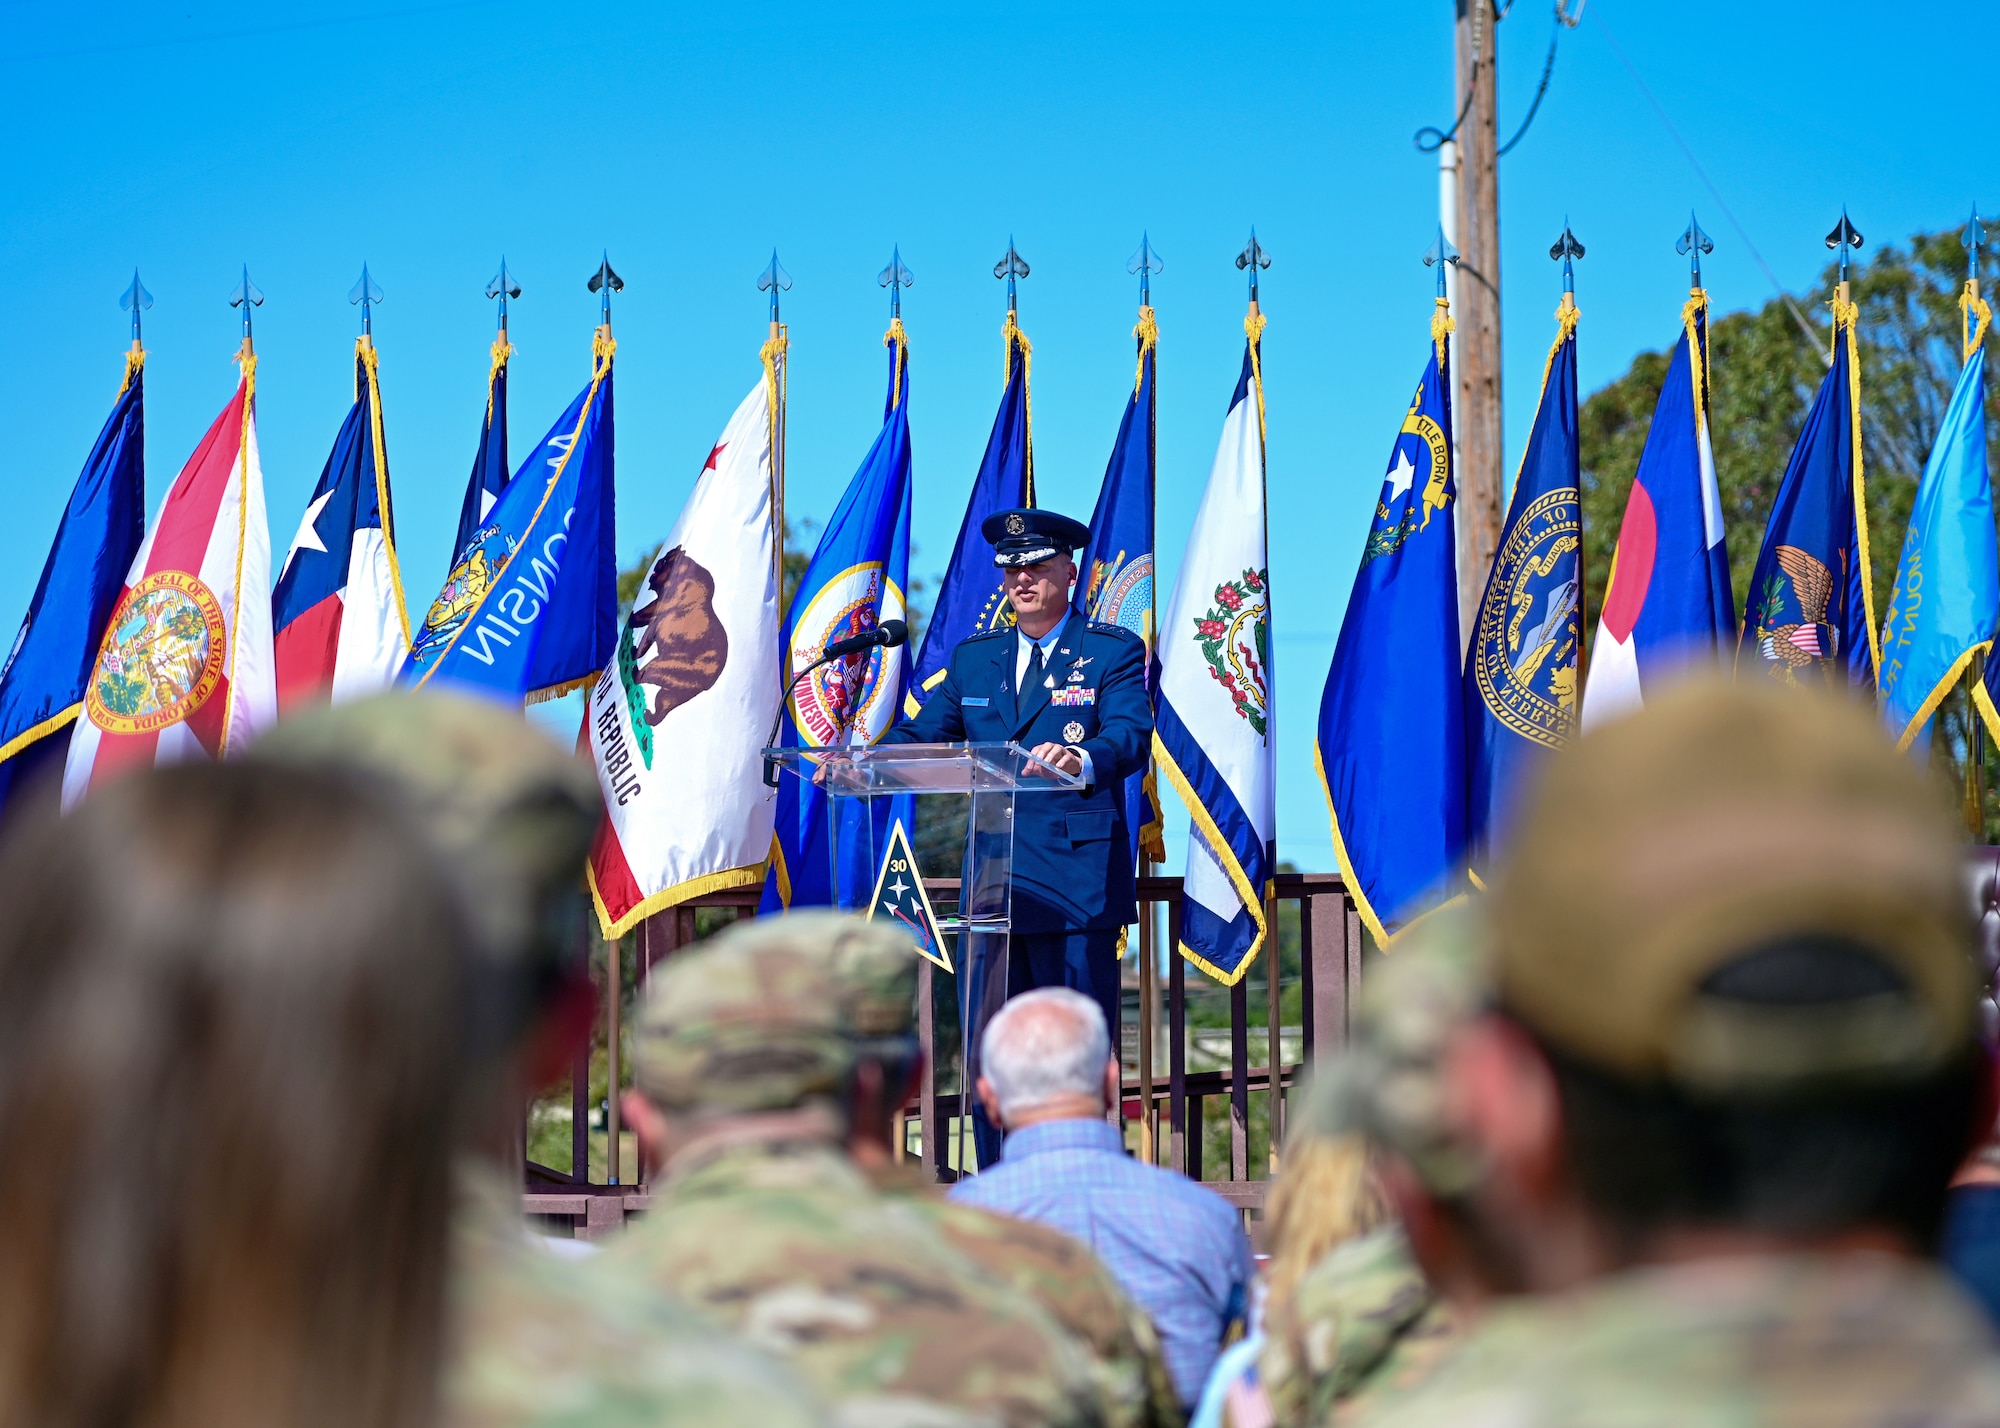 U.S. Space Force Lt. Gen. Michael Guetlein, Space Systems Command commander, delivers remarks during the Space Launch Delta 30 change of command ceremony on Vandenberg Space Force Base, Calif., July 13, 2023. U.S. Space Force Col. Robert Long relinquished command to U.S. Space Force Col. Mark Shoemaker. (U.S. Space Force photo by Airman 1st Class Ryan Quijas)